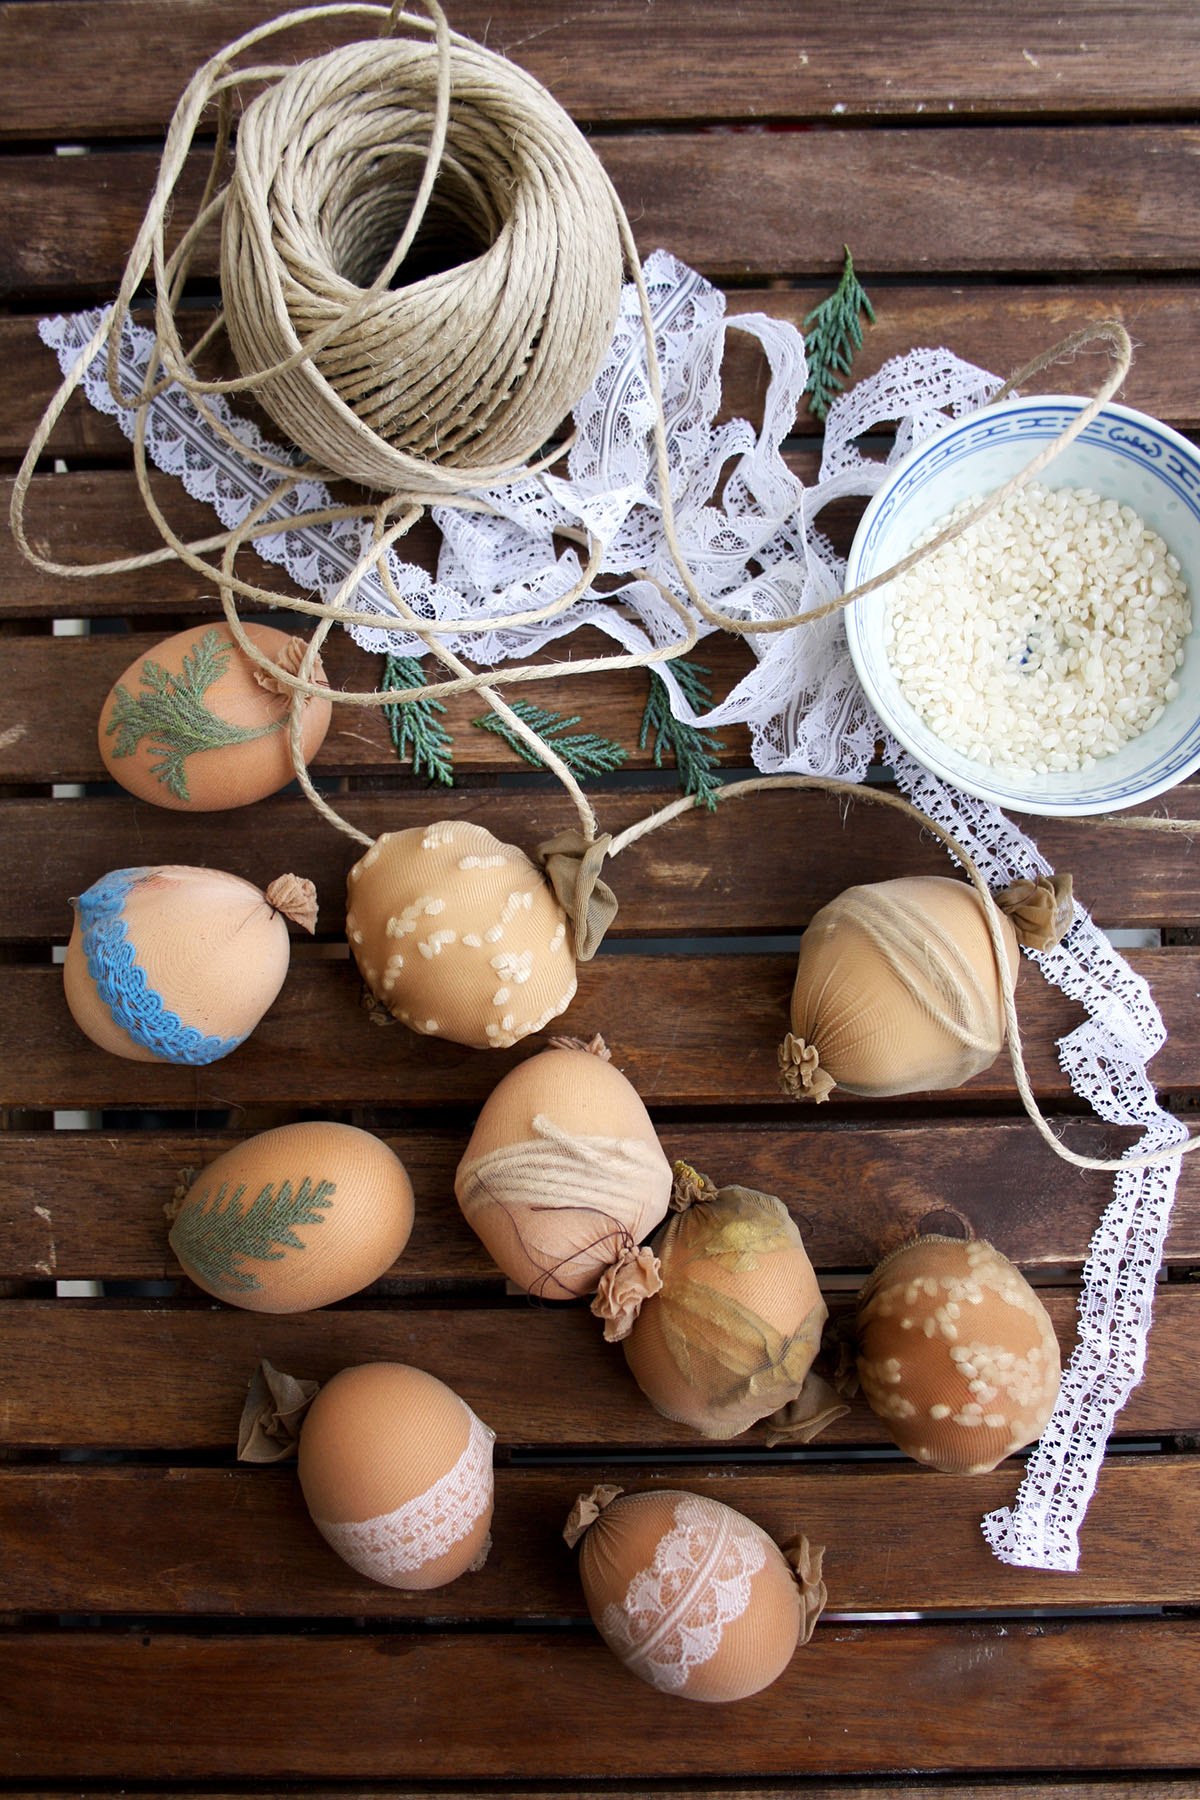 Natural Egg Dye with Onion Skins 5 - Preparing to Craft